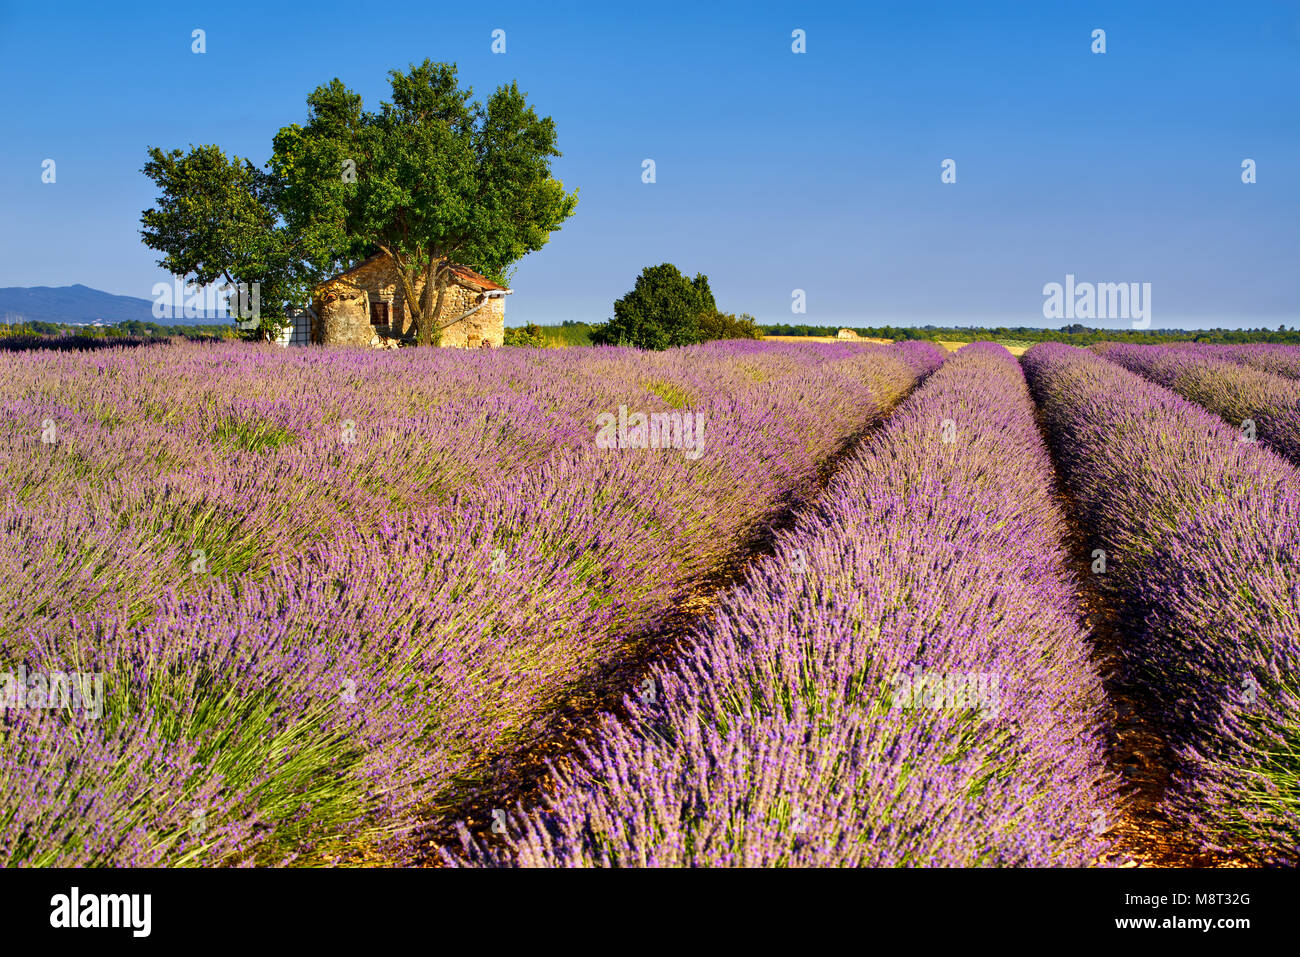 Lavender fields in Valensole with stone house and trees in Summer. Plateau de Valensole, Alpes de Haute Provence, France Stock Photo